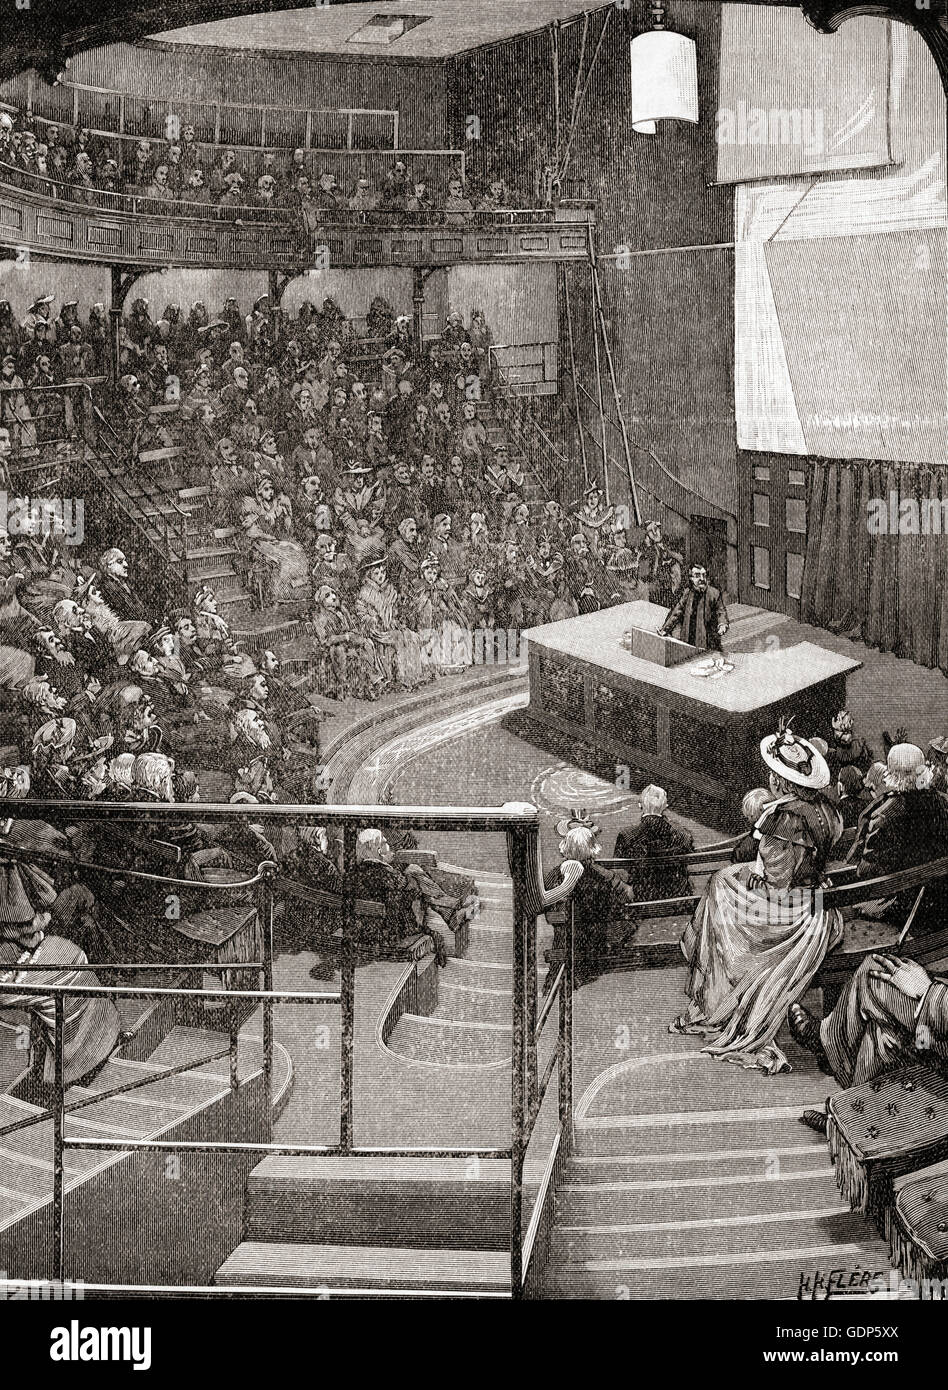 The Lecture Room, Royal Institution, London, England in the 19th century. Stock Photo